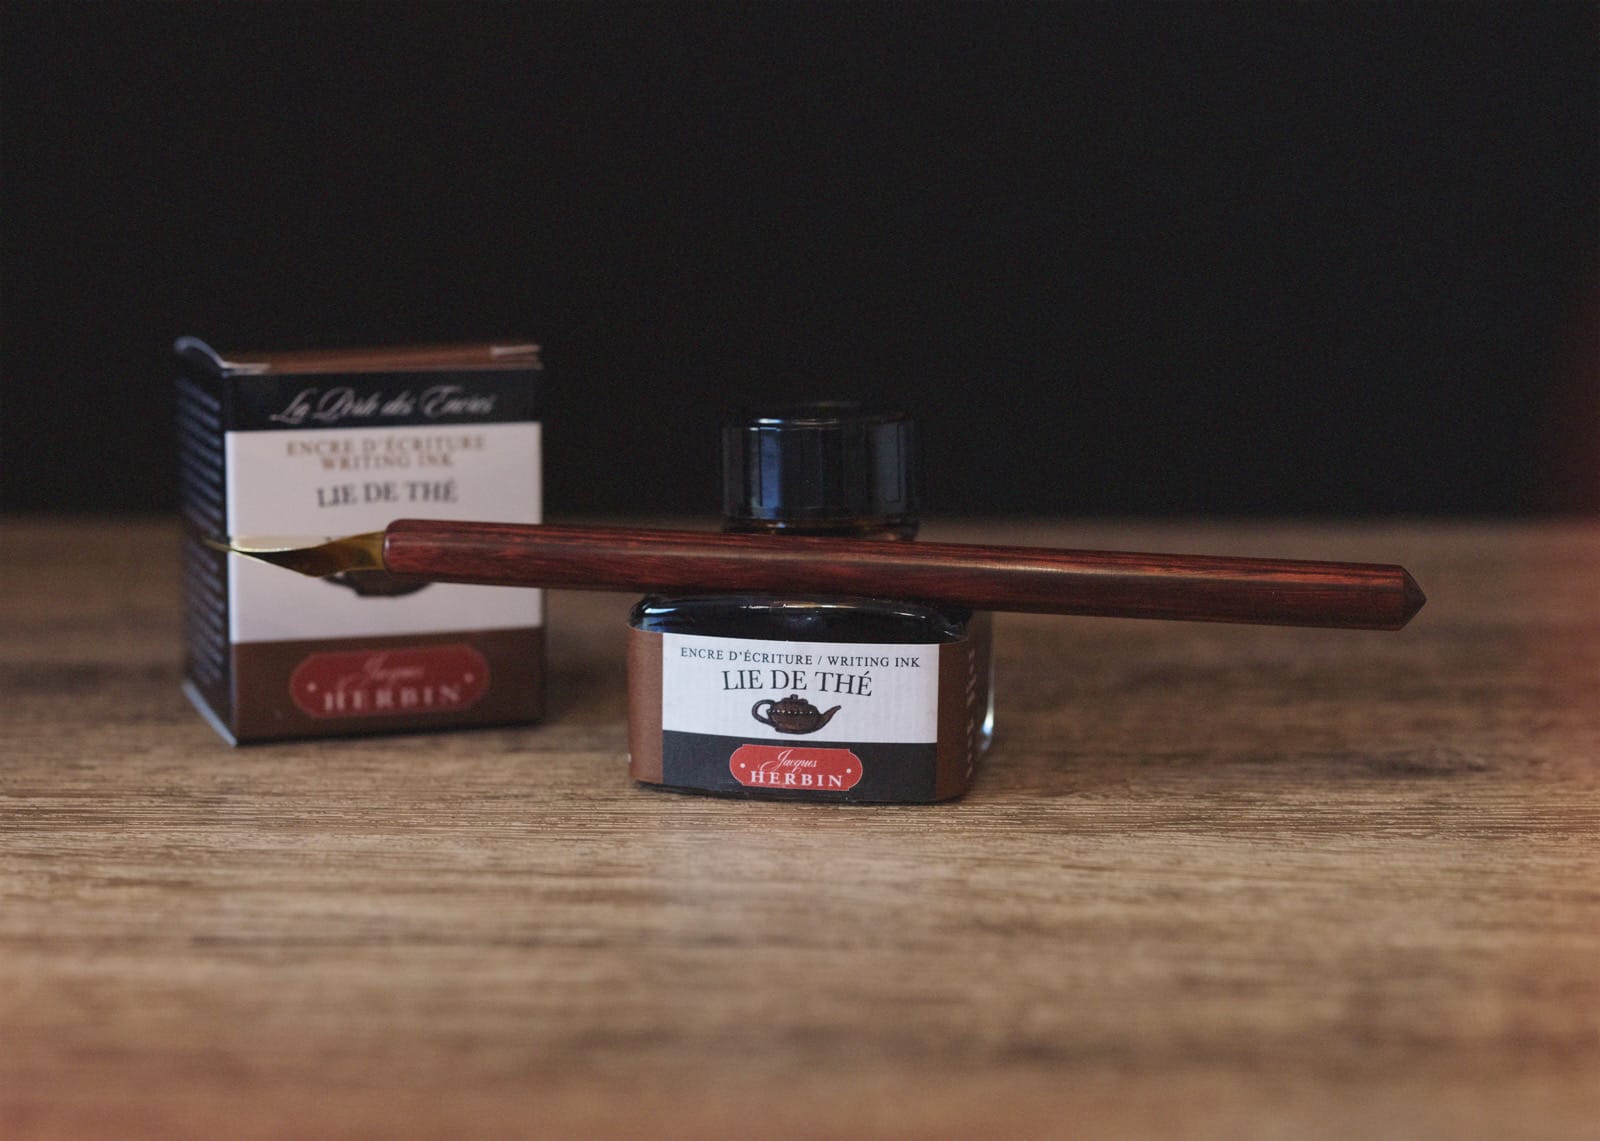 Bottle of Lie de Thé with a folded nib pen on the built-in pen rest at the front of the bottle, a distinctive feature of this line of inks.